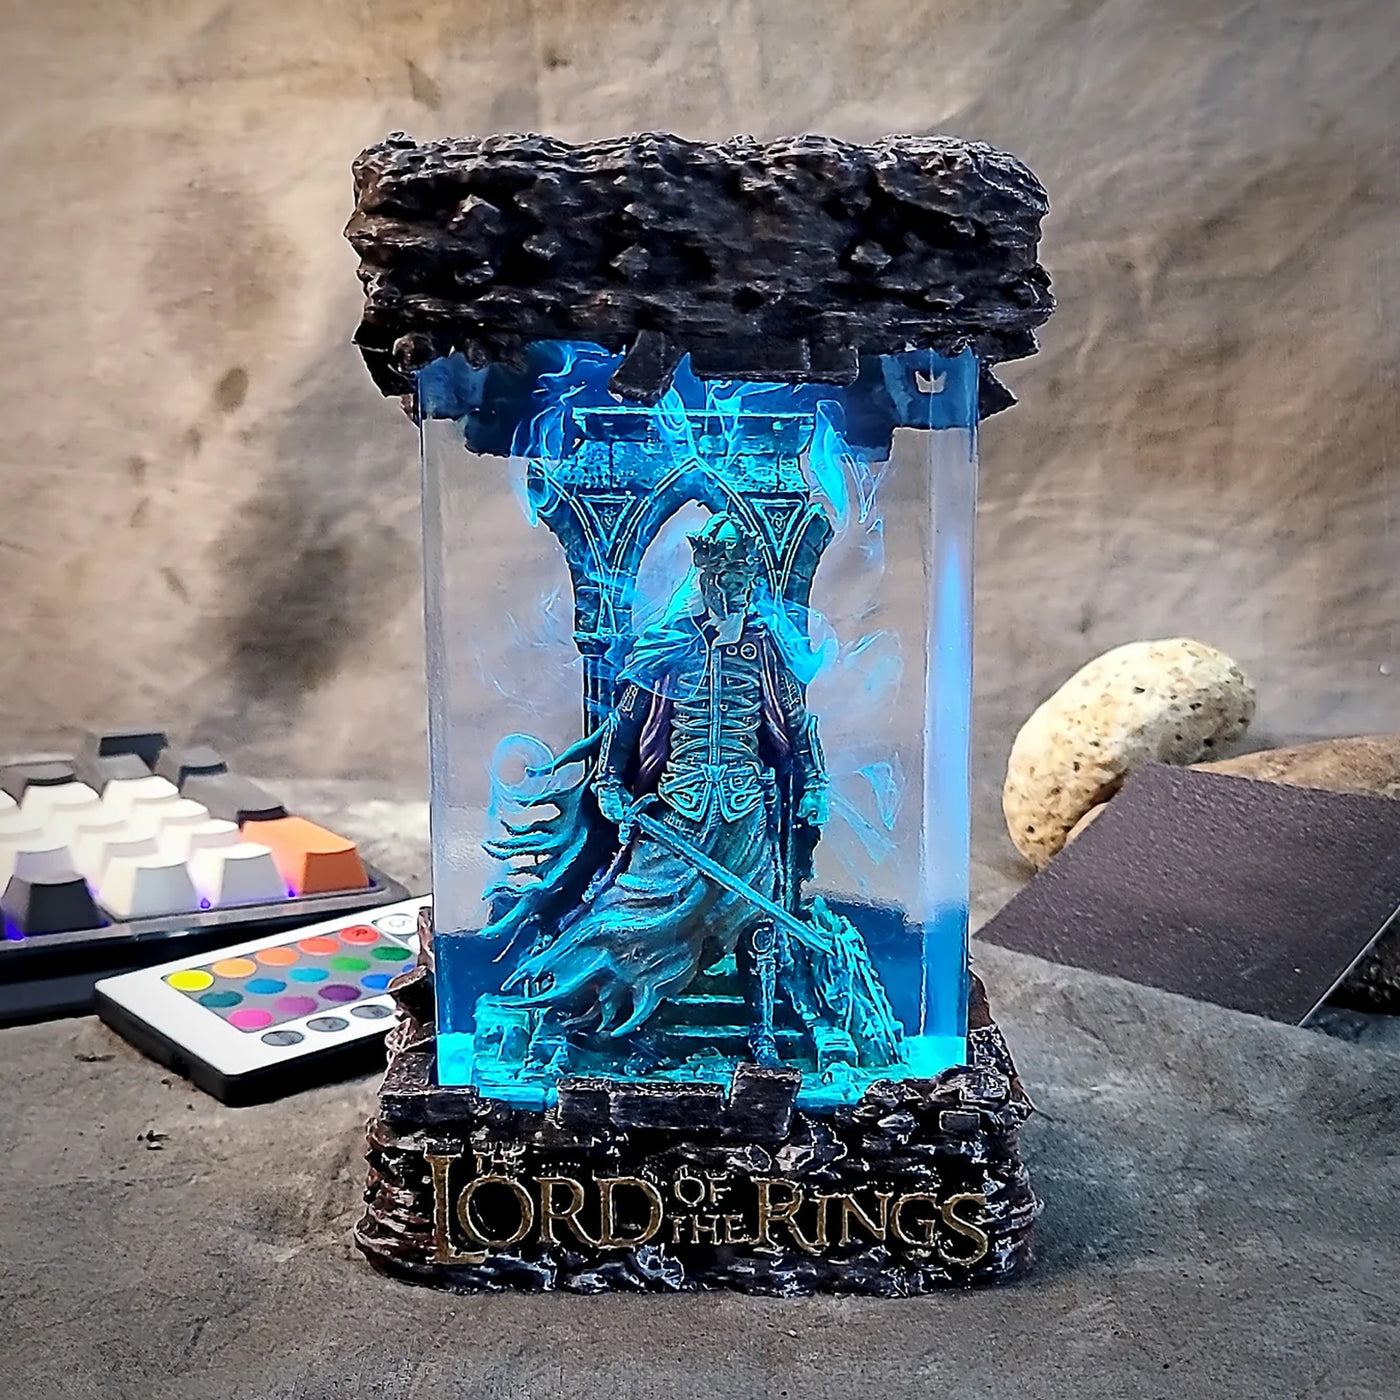 LOTR Lord Of Rings King of the Dead Rioc Diorama Epoxy Resin Lamp, Night Light, Wireless Lights